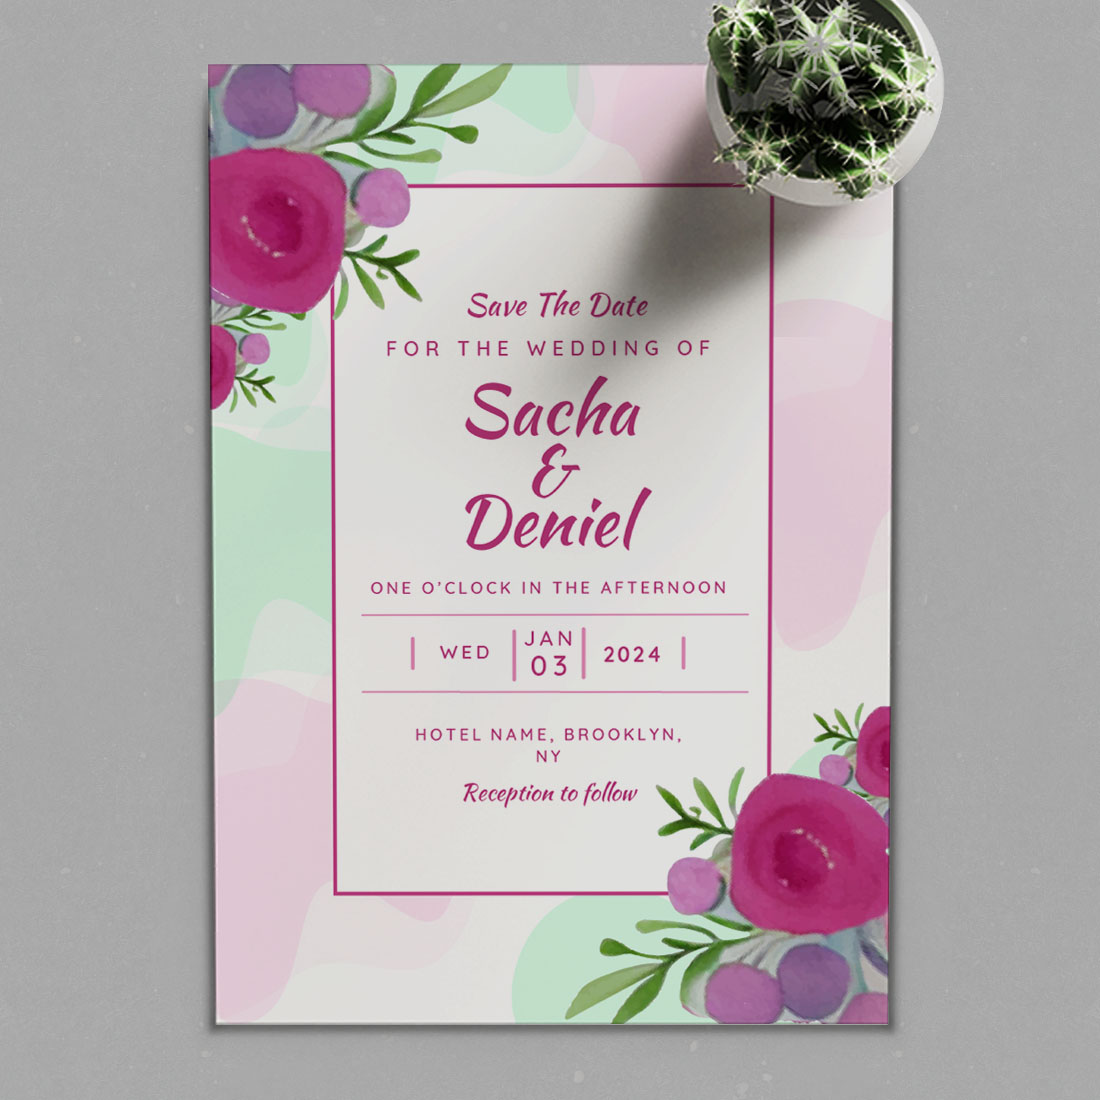 Invitation Floral Card & Background for Wedding and Birthday by DesignConcept.